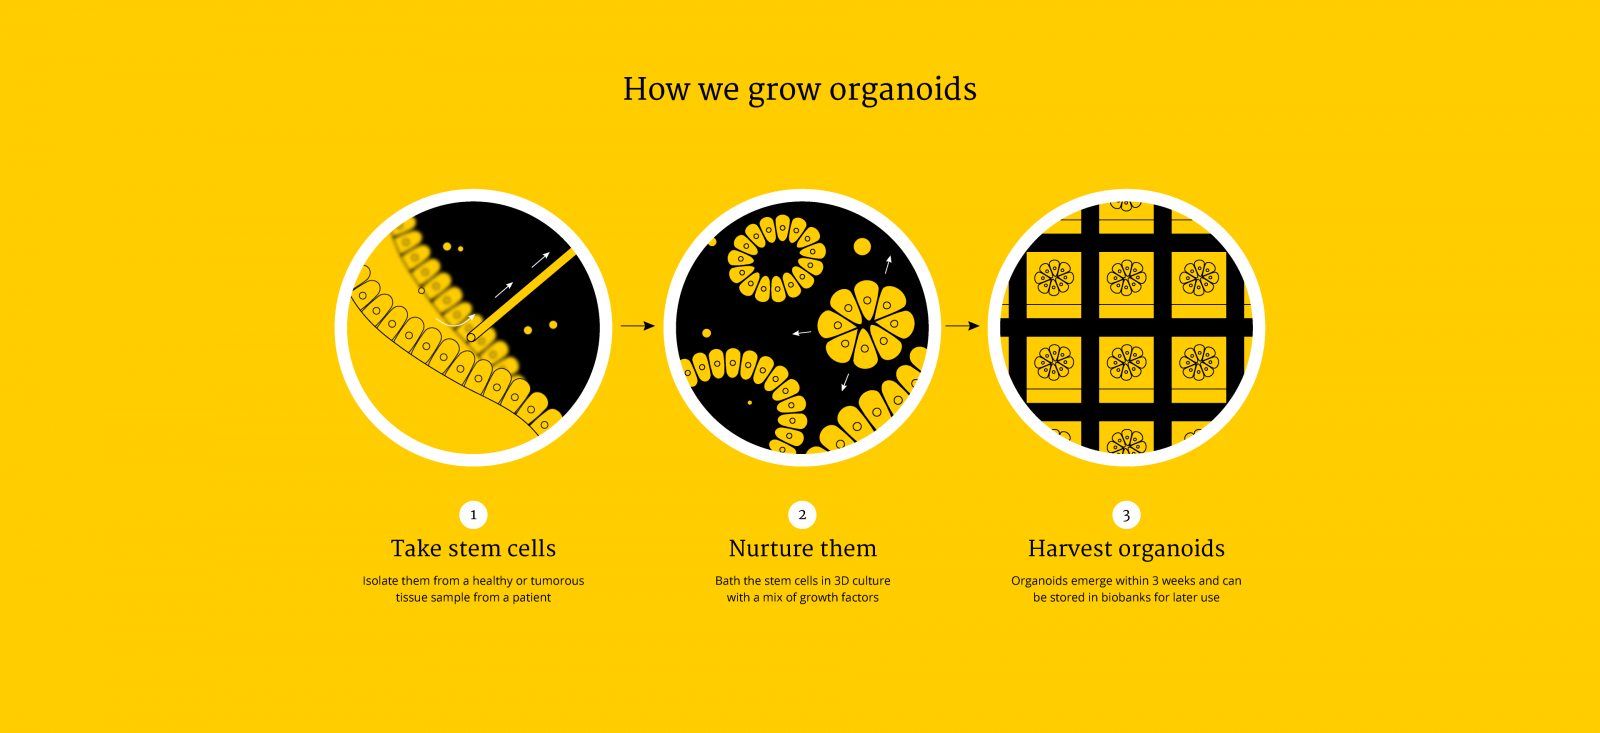 How we grow organoids in 3 steps: 1. Take stem cells, 2. Nurture them and 3. Harvest organoids. More information in text under heading "How we grow organoids"